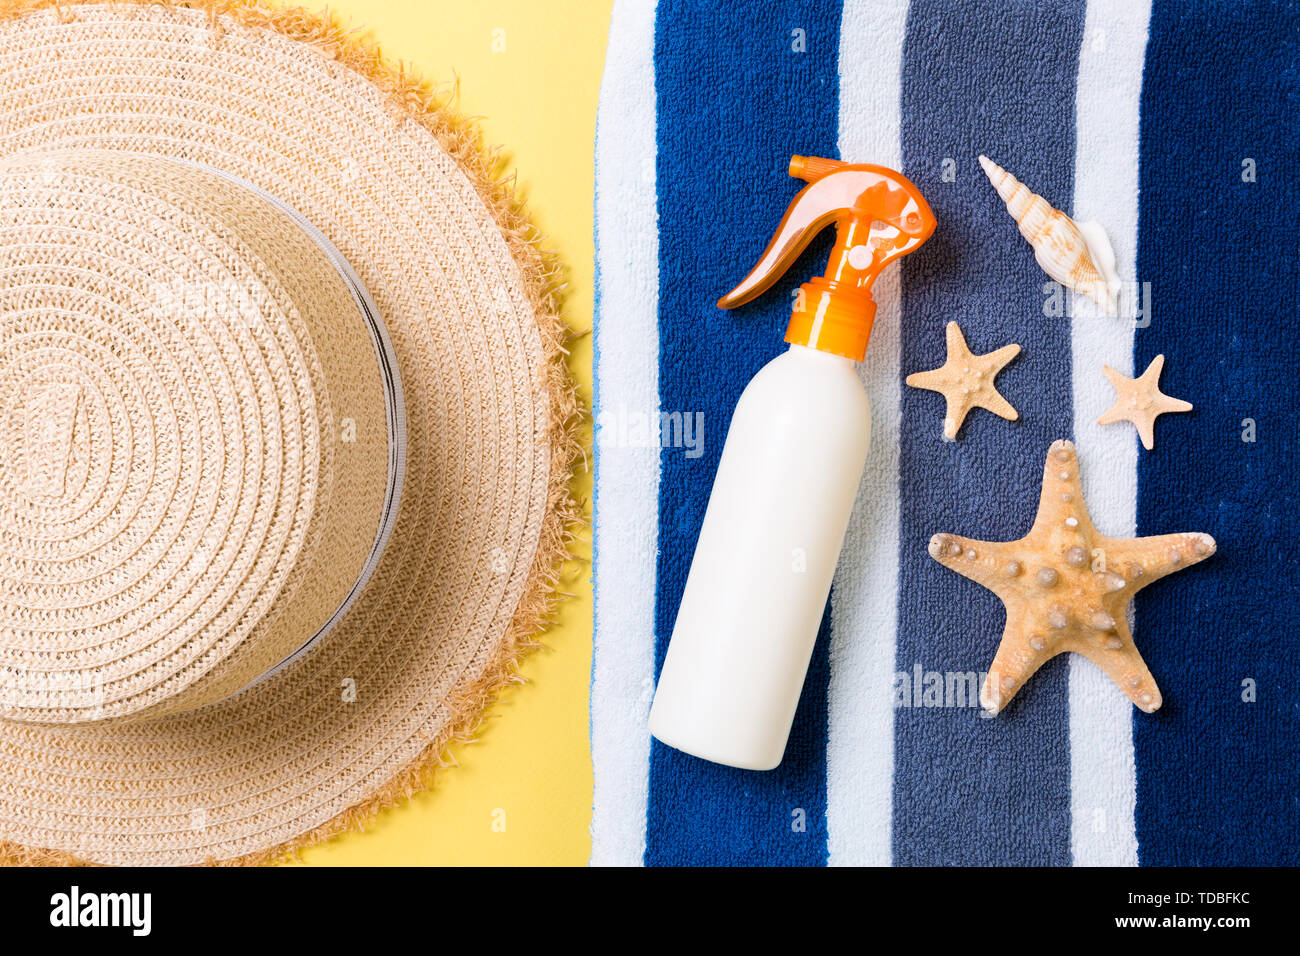 Beach flat lay accessories with copy space. Striped blue and white towel, seashells, staw sunhat and a bottle of sunblock on yellow background. Summer Stock Photo